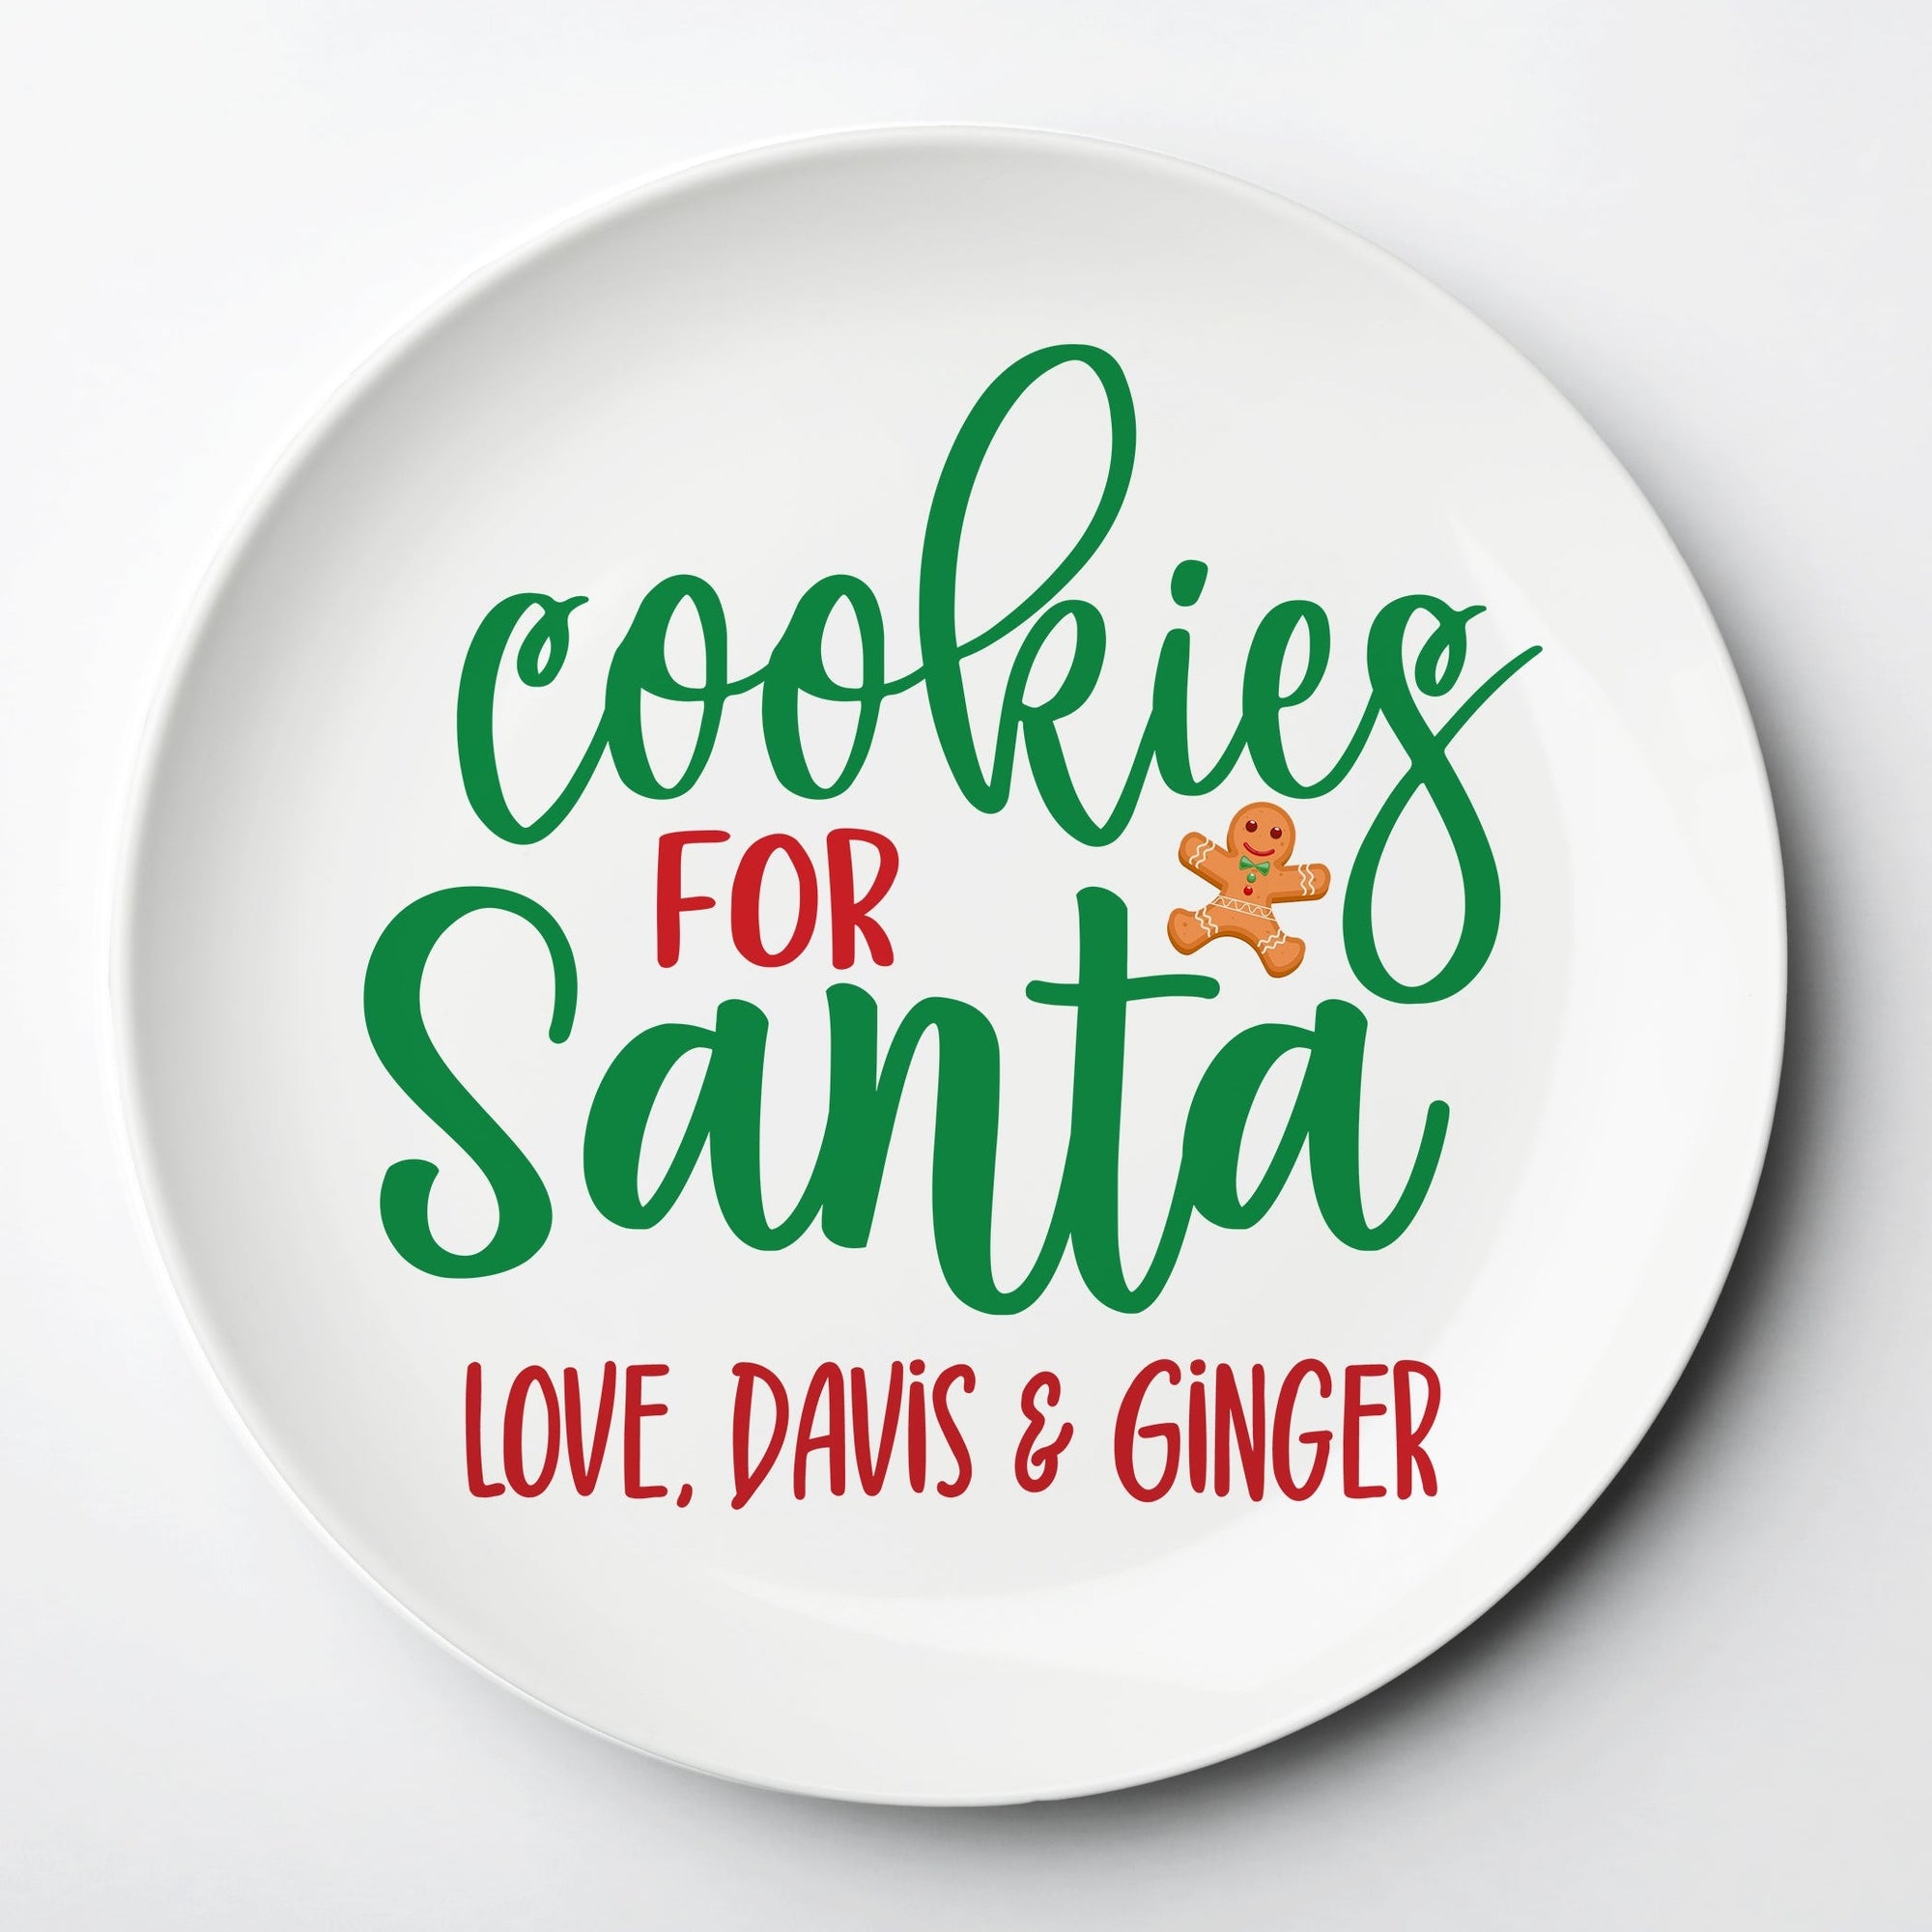 Cookies for Santa personalized plate, reusable, dishwasher and microwave safe. won't break